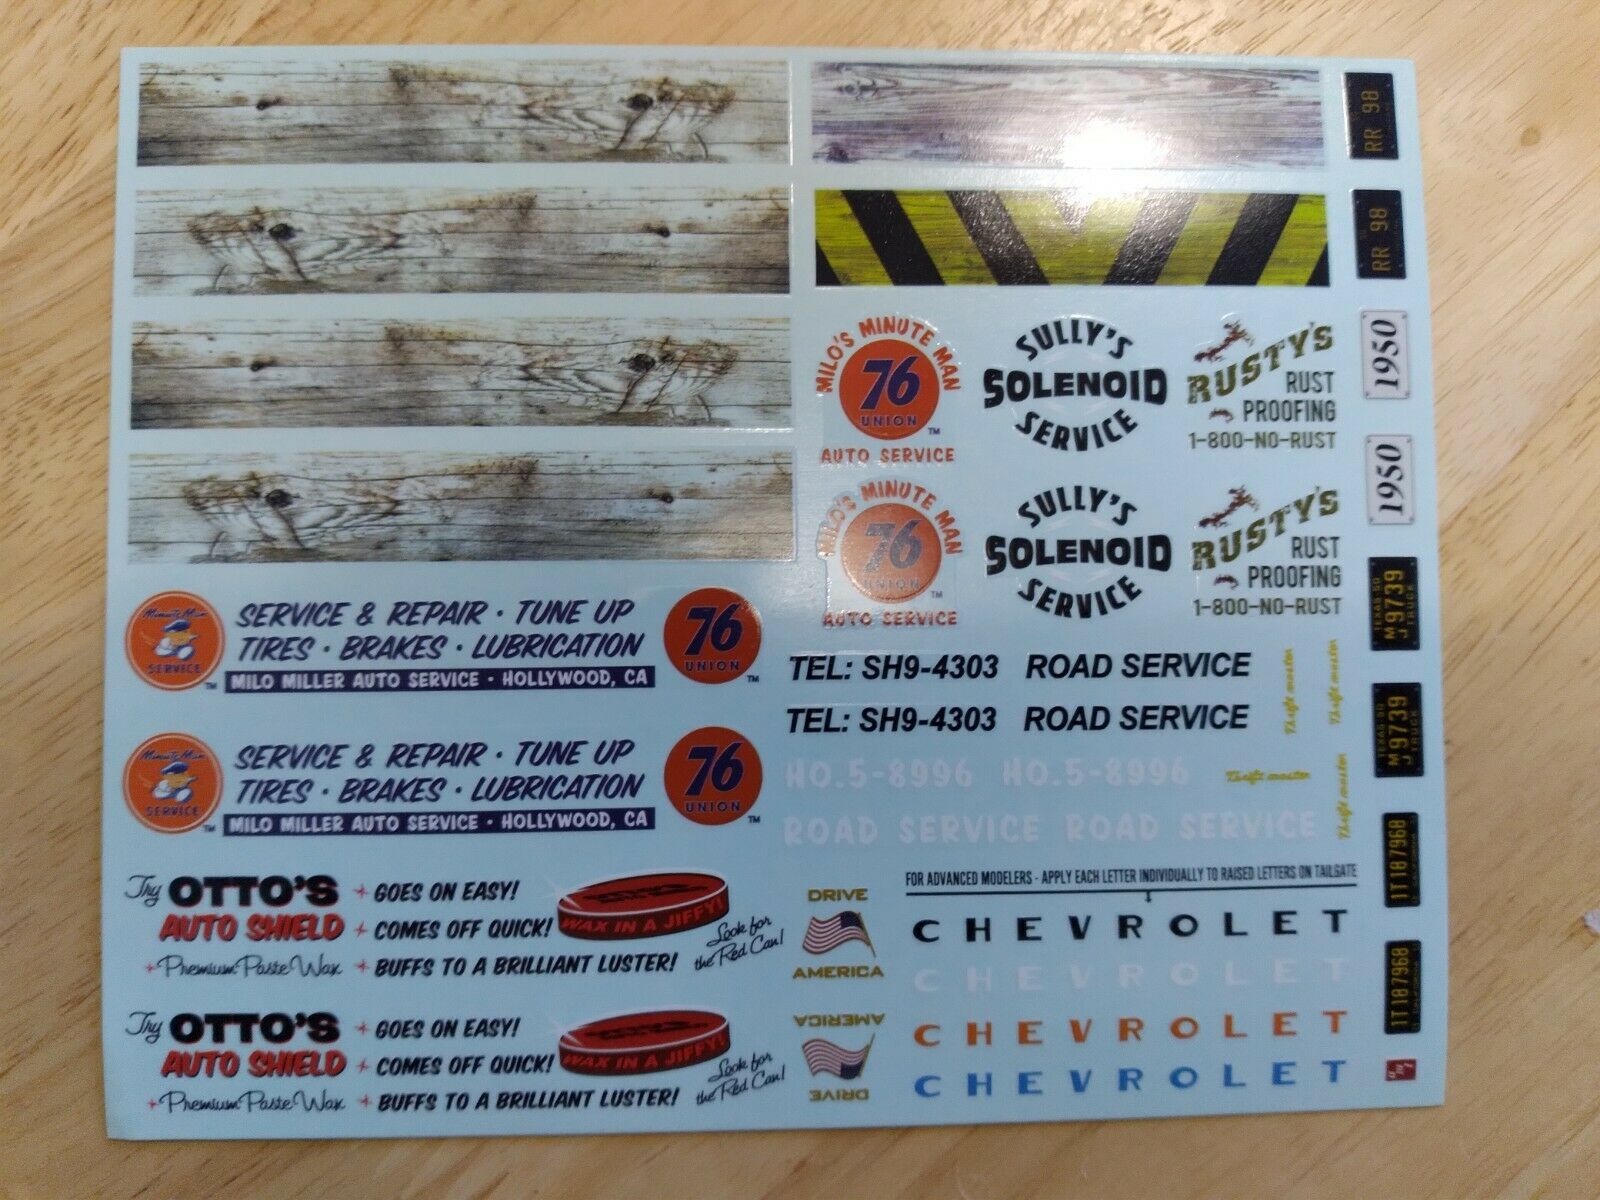 Decals From '50 Chevy Pickup 1950 - Union 76 Service - G Scale Parts, Diorama